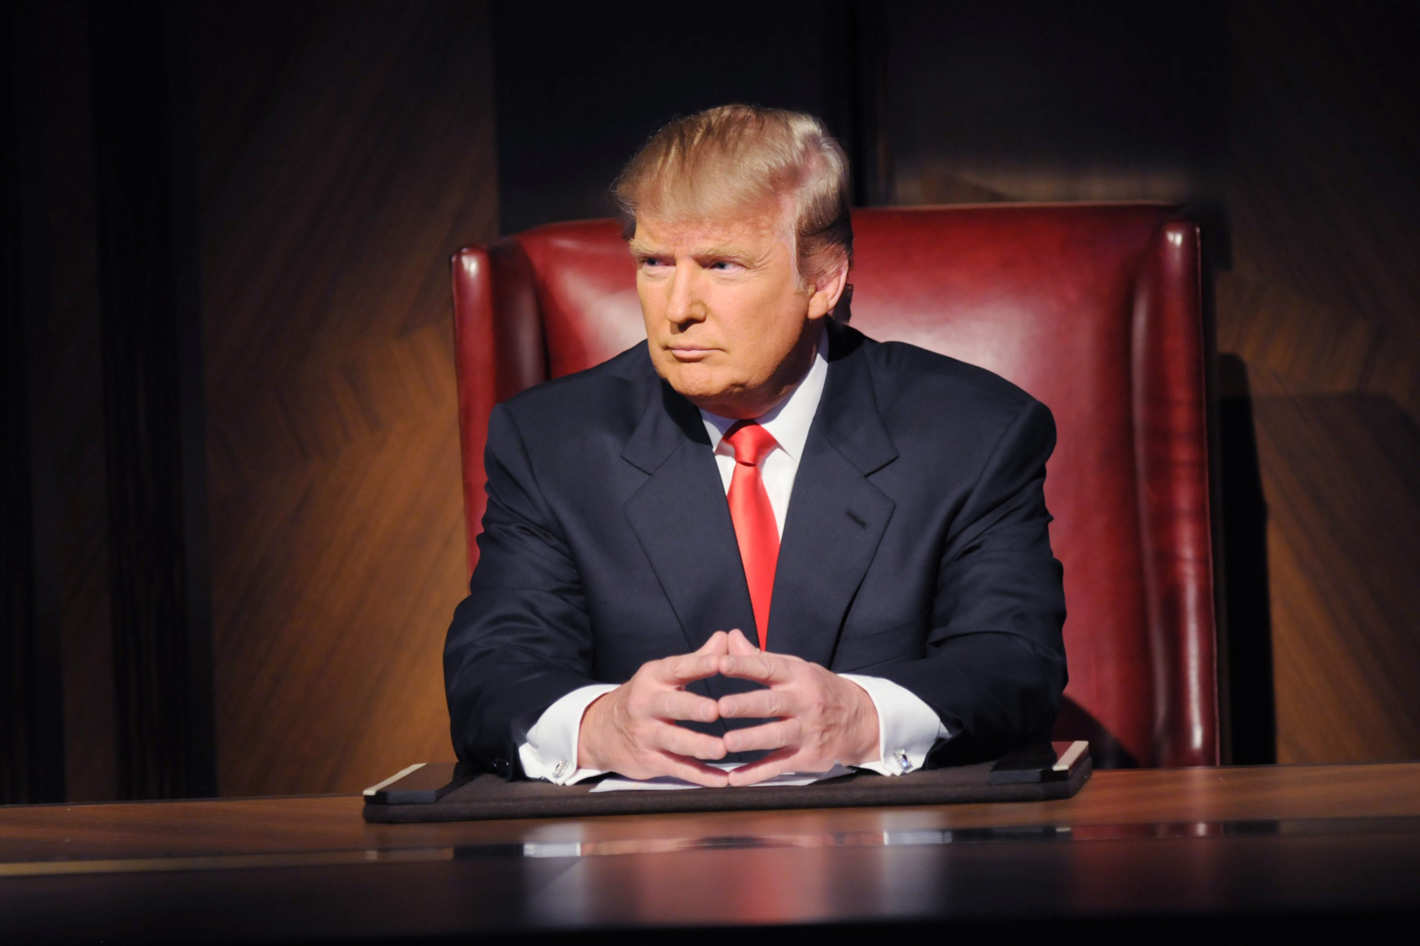 Donald Trump Will Continue to Be a Producer on the "New Celebrity Apprentice"